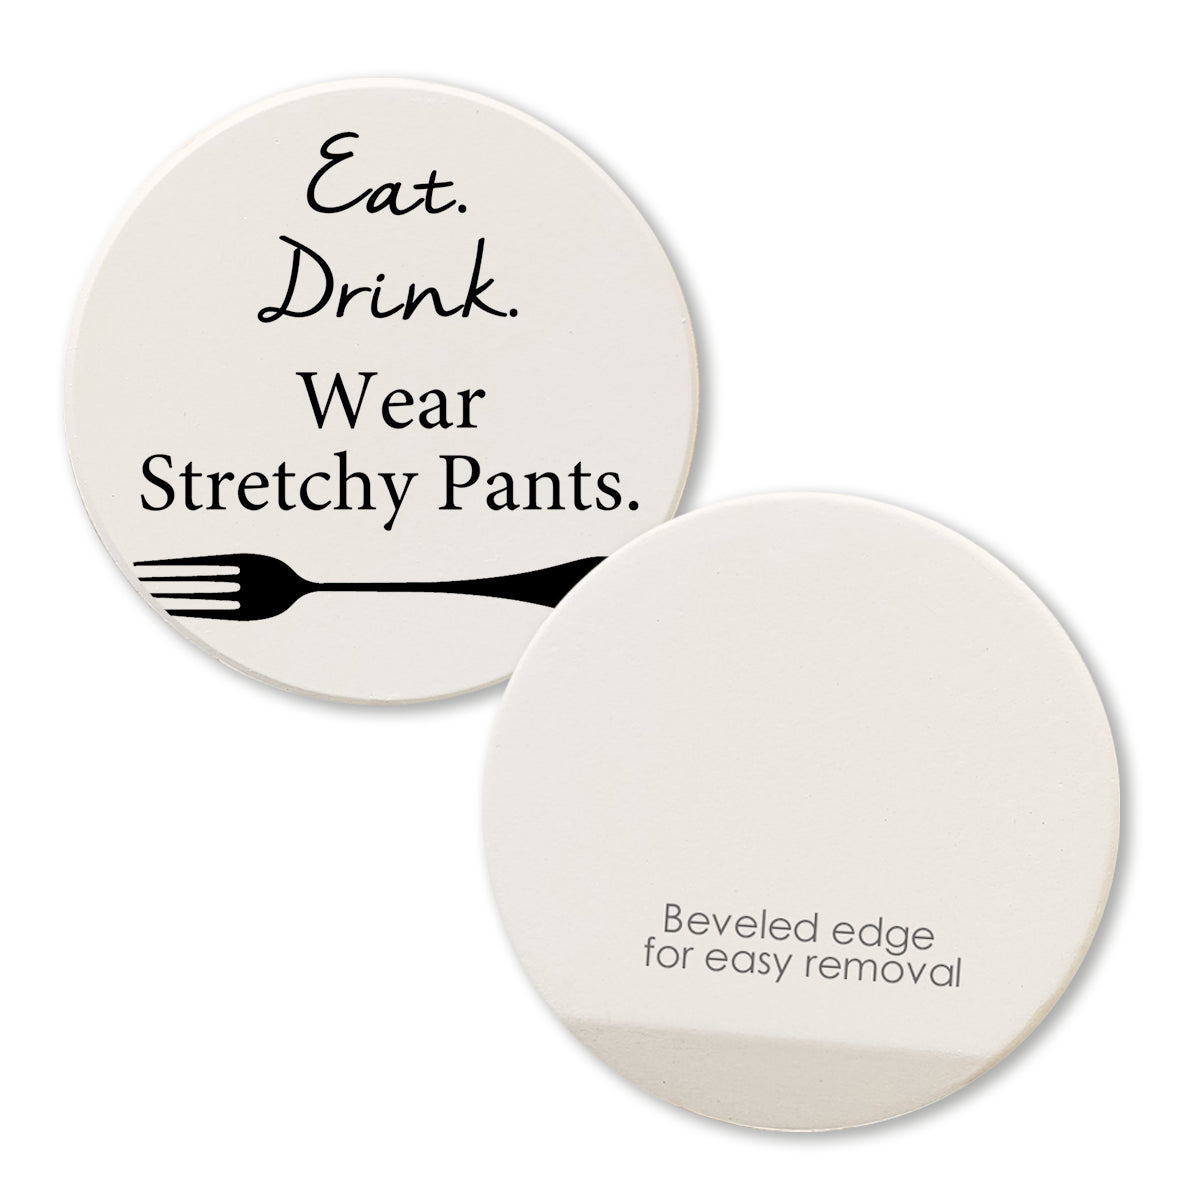 "Eat Drink Wear Stretchy Pants" Round Car Coaster